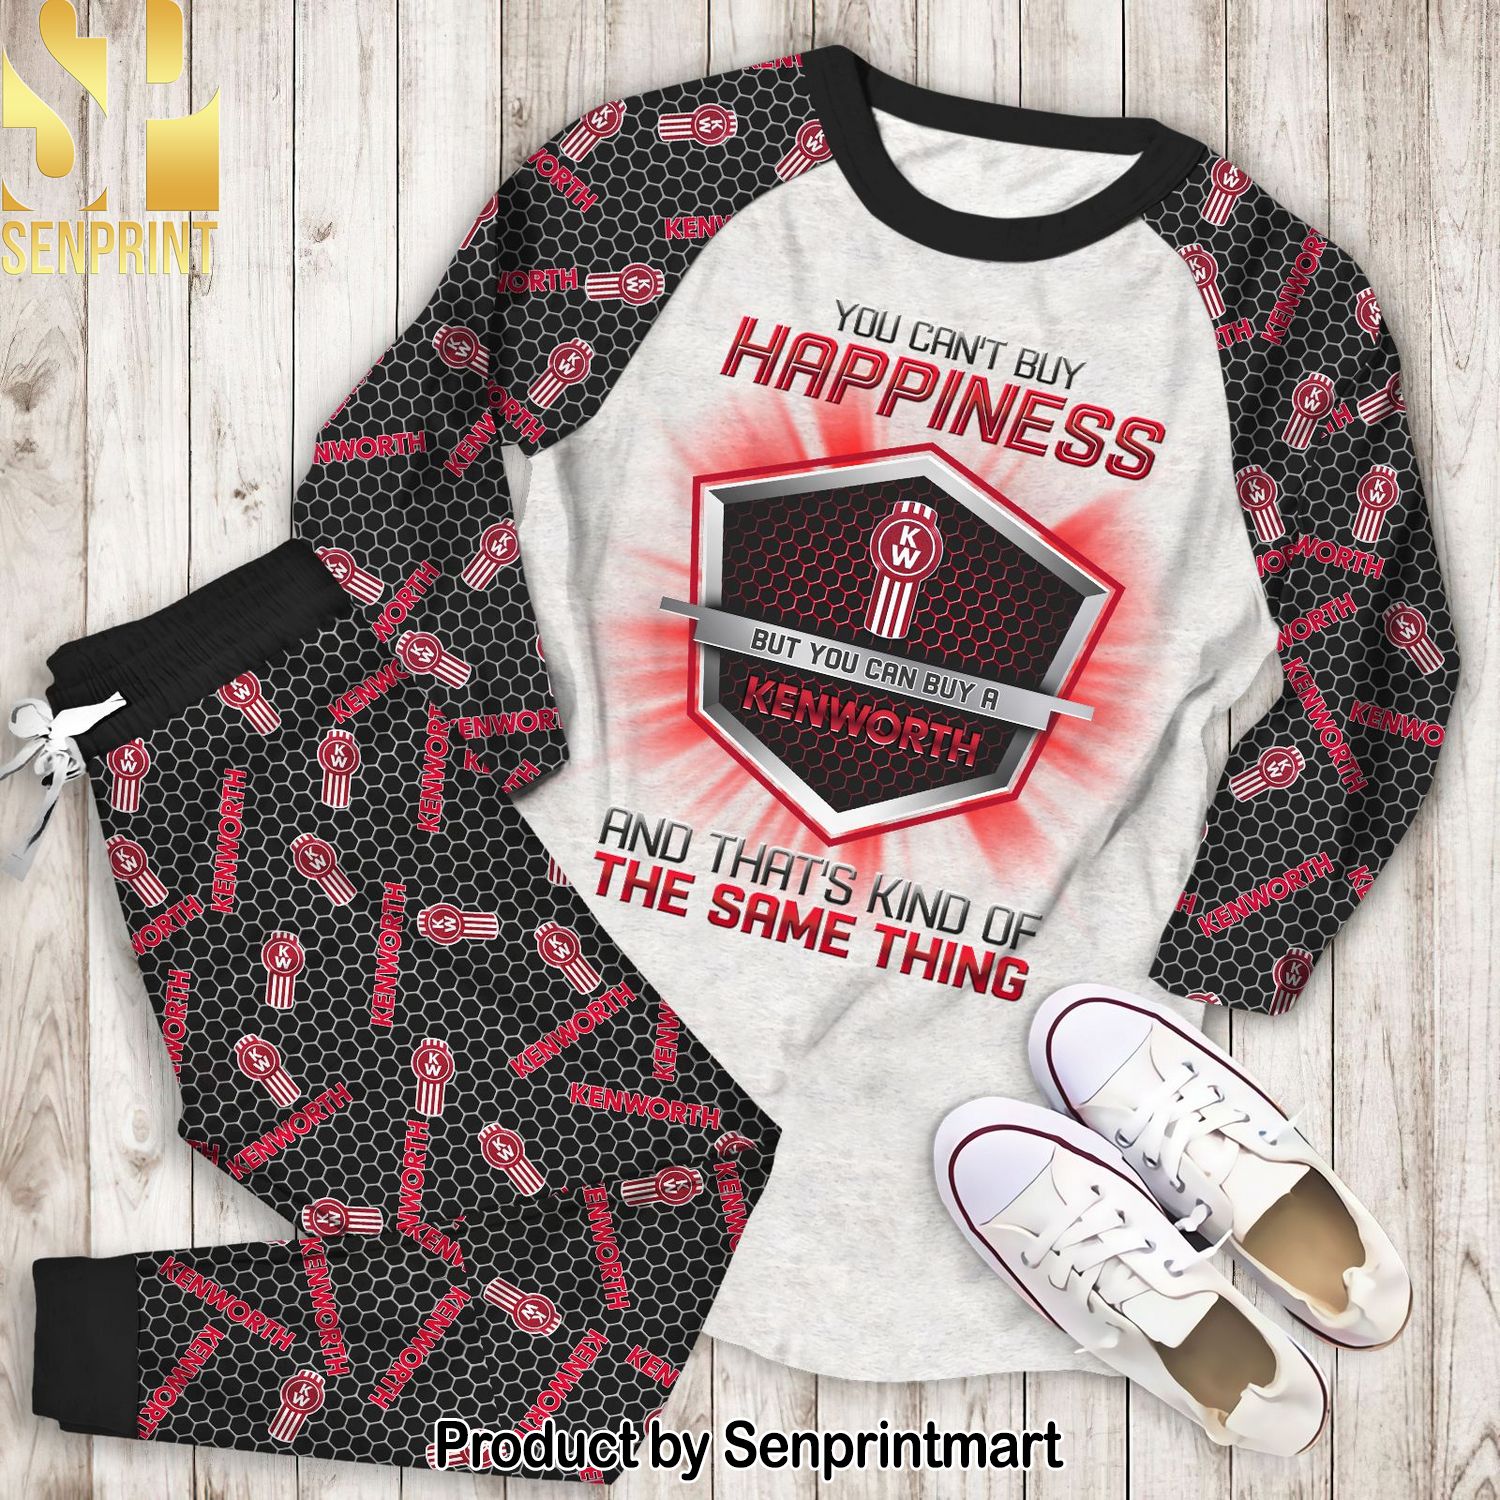 You Can’t Buy Happiness But You Can Buy a Kenworth All Over Print Unisex Pajamas Set